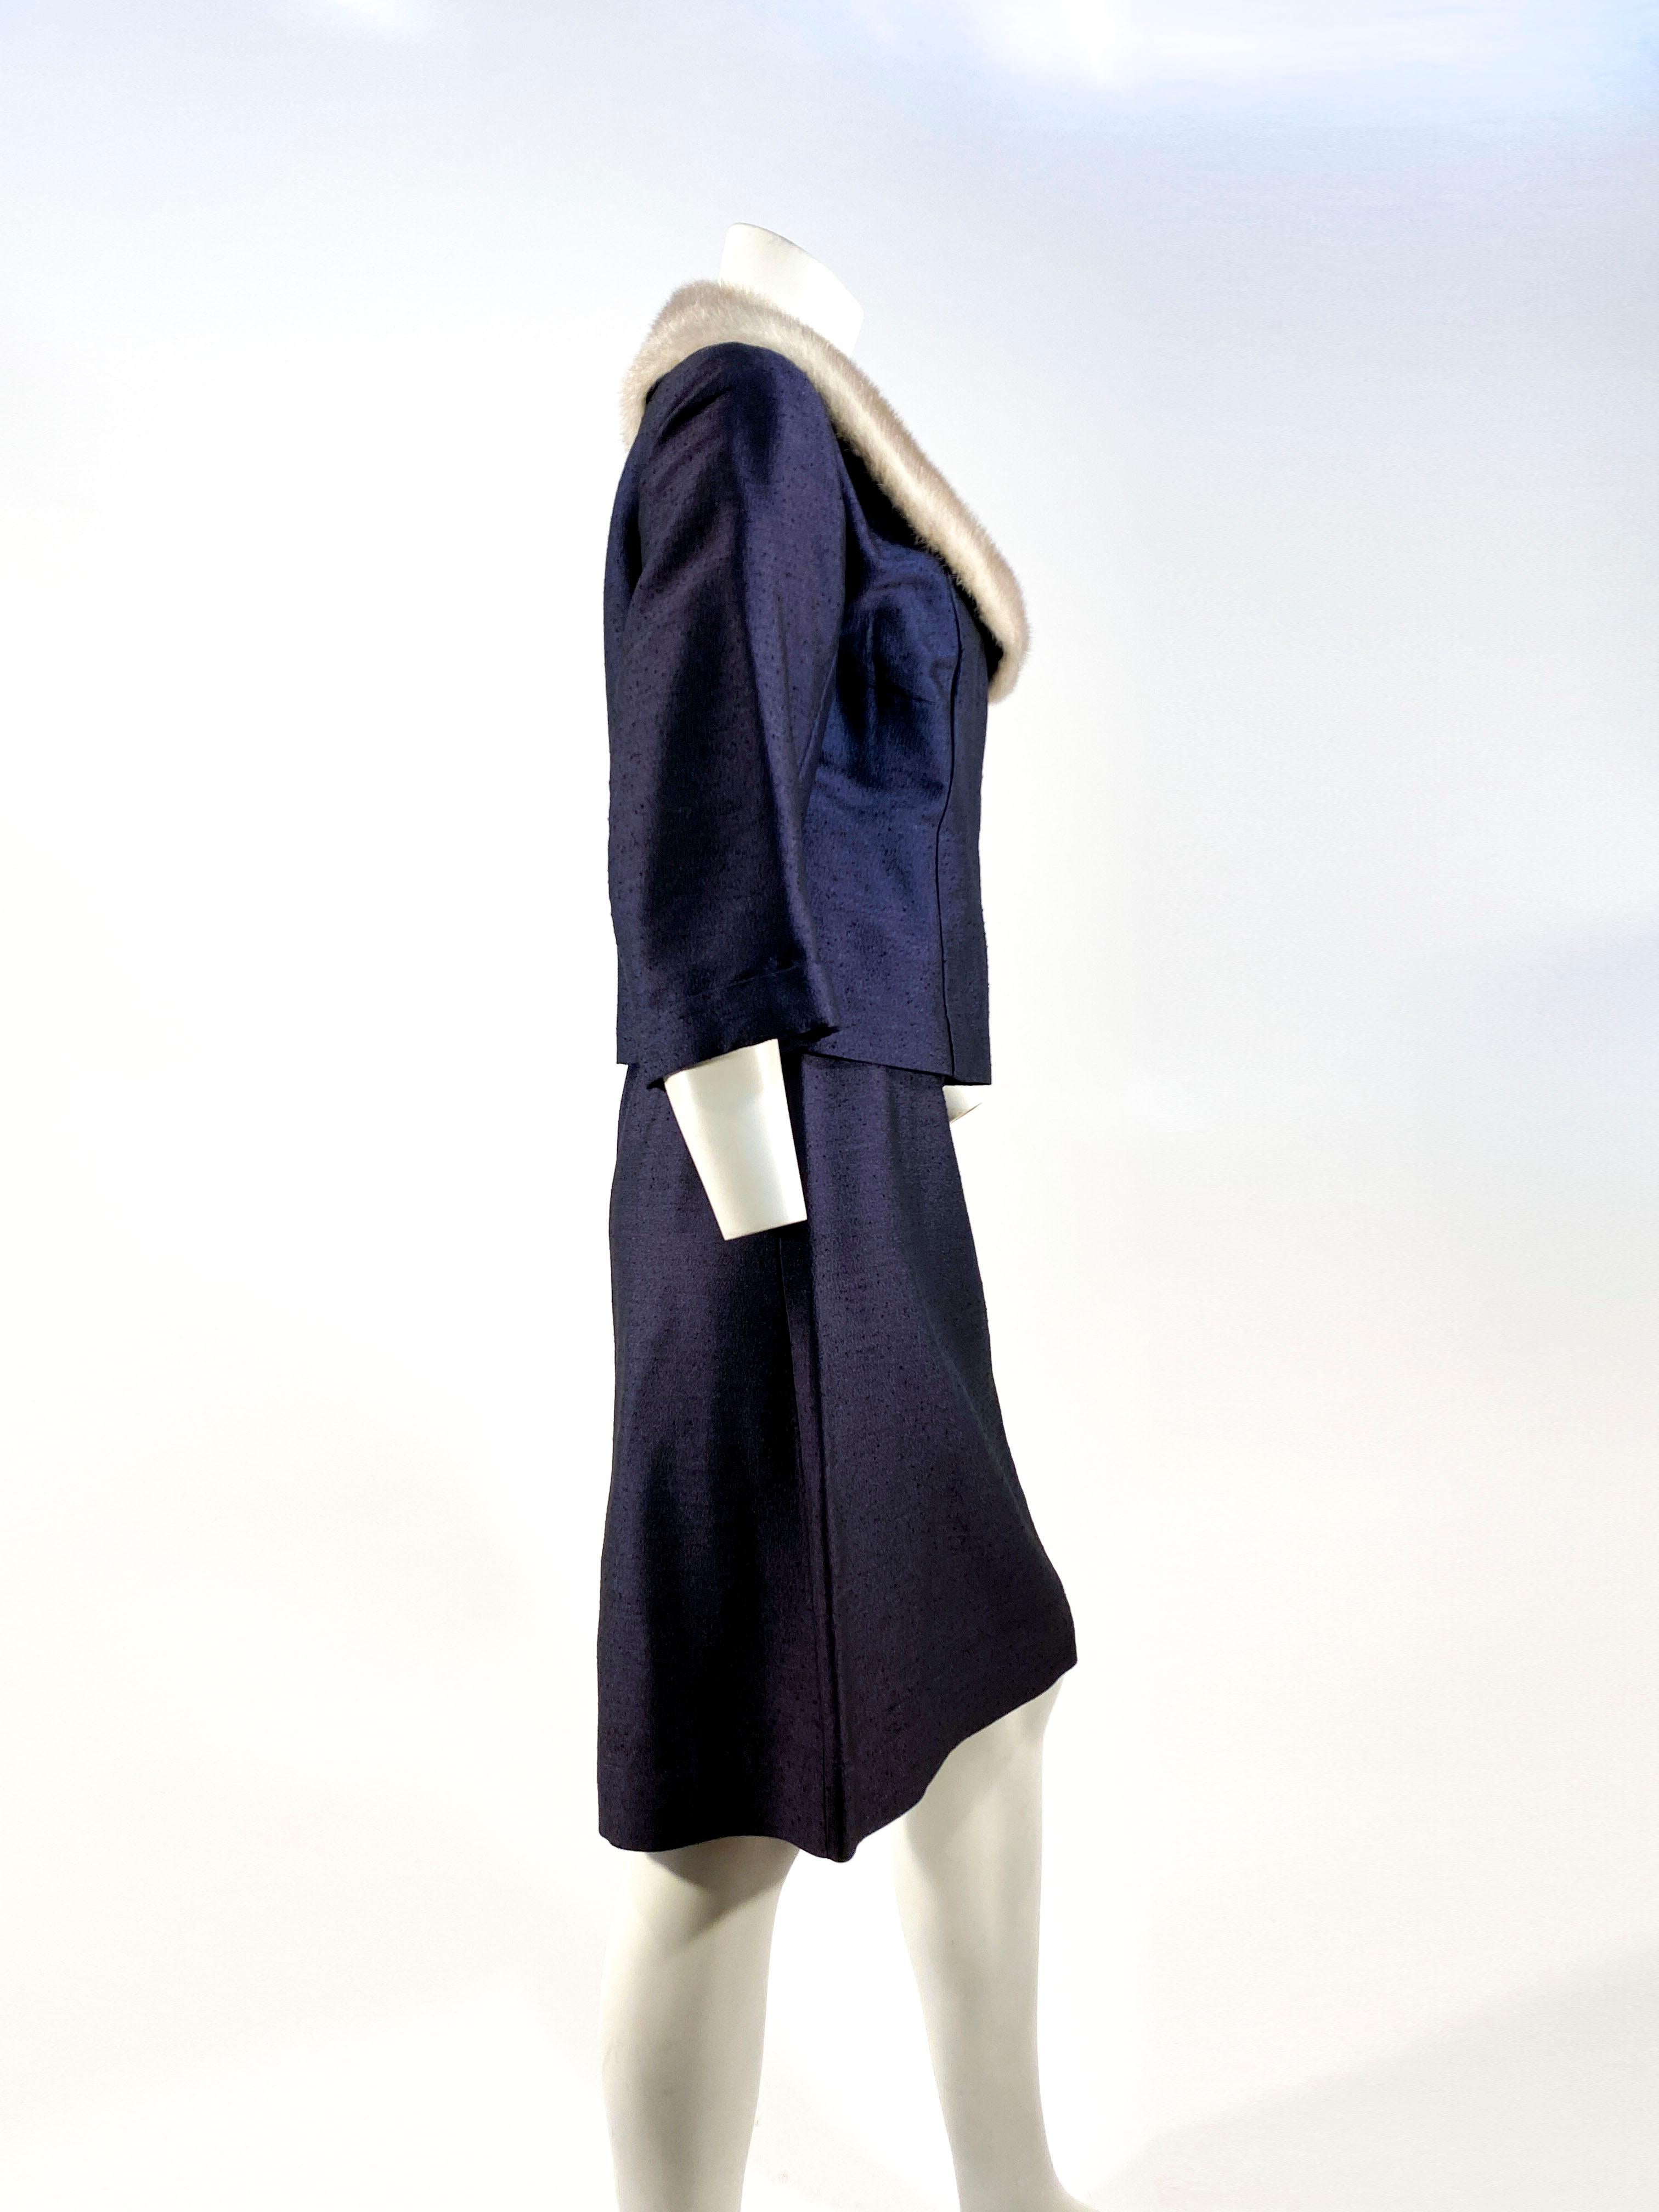 Women's 1960s Navy Suit with Silver Mink Collar